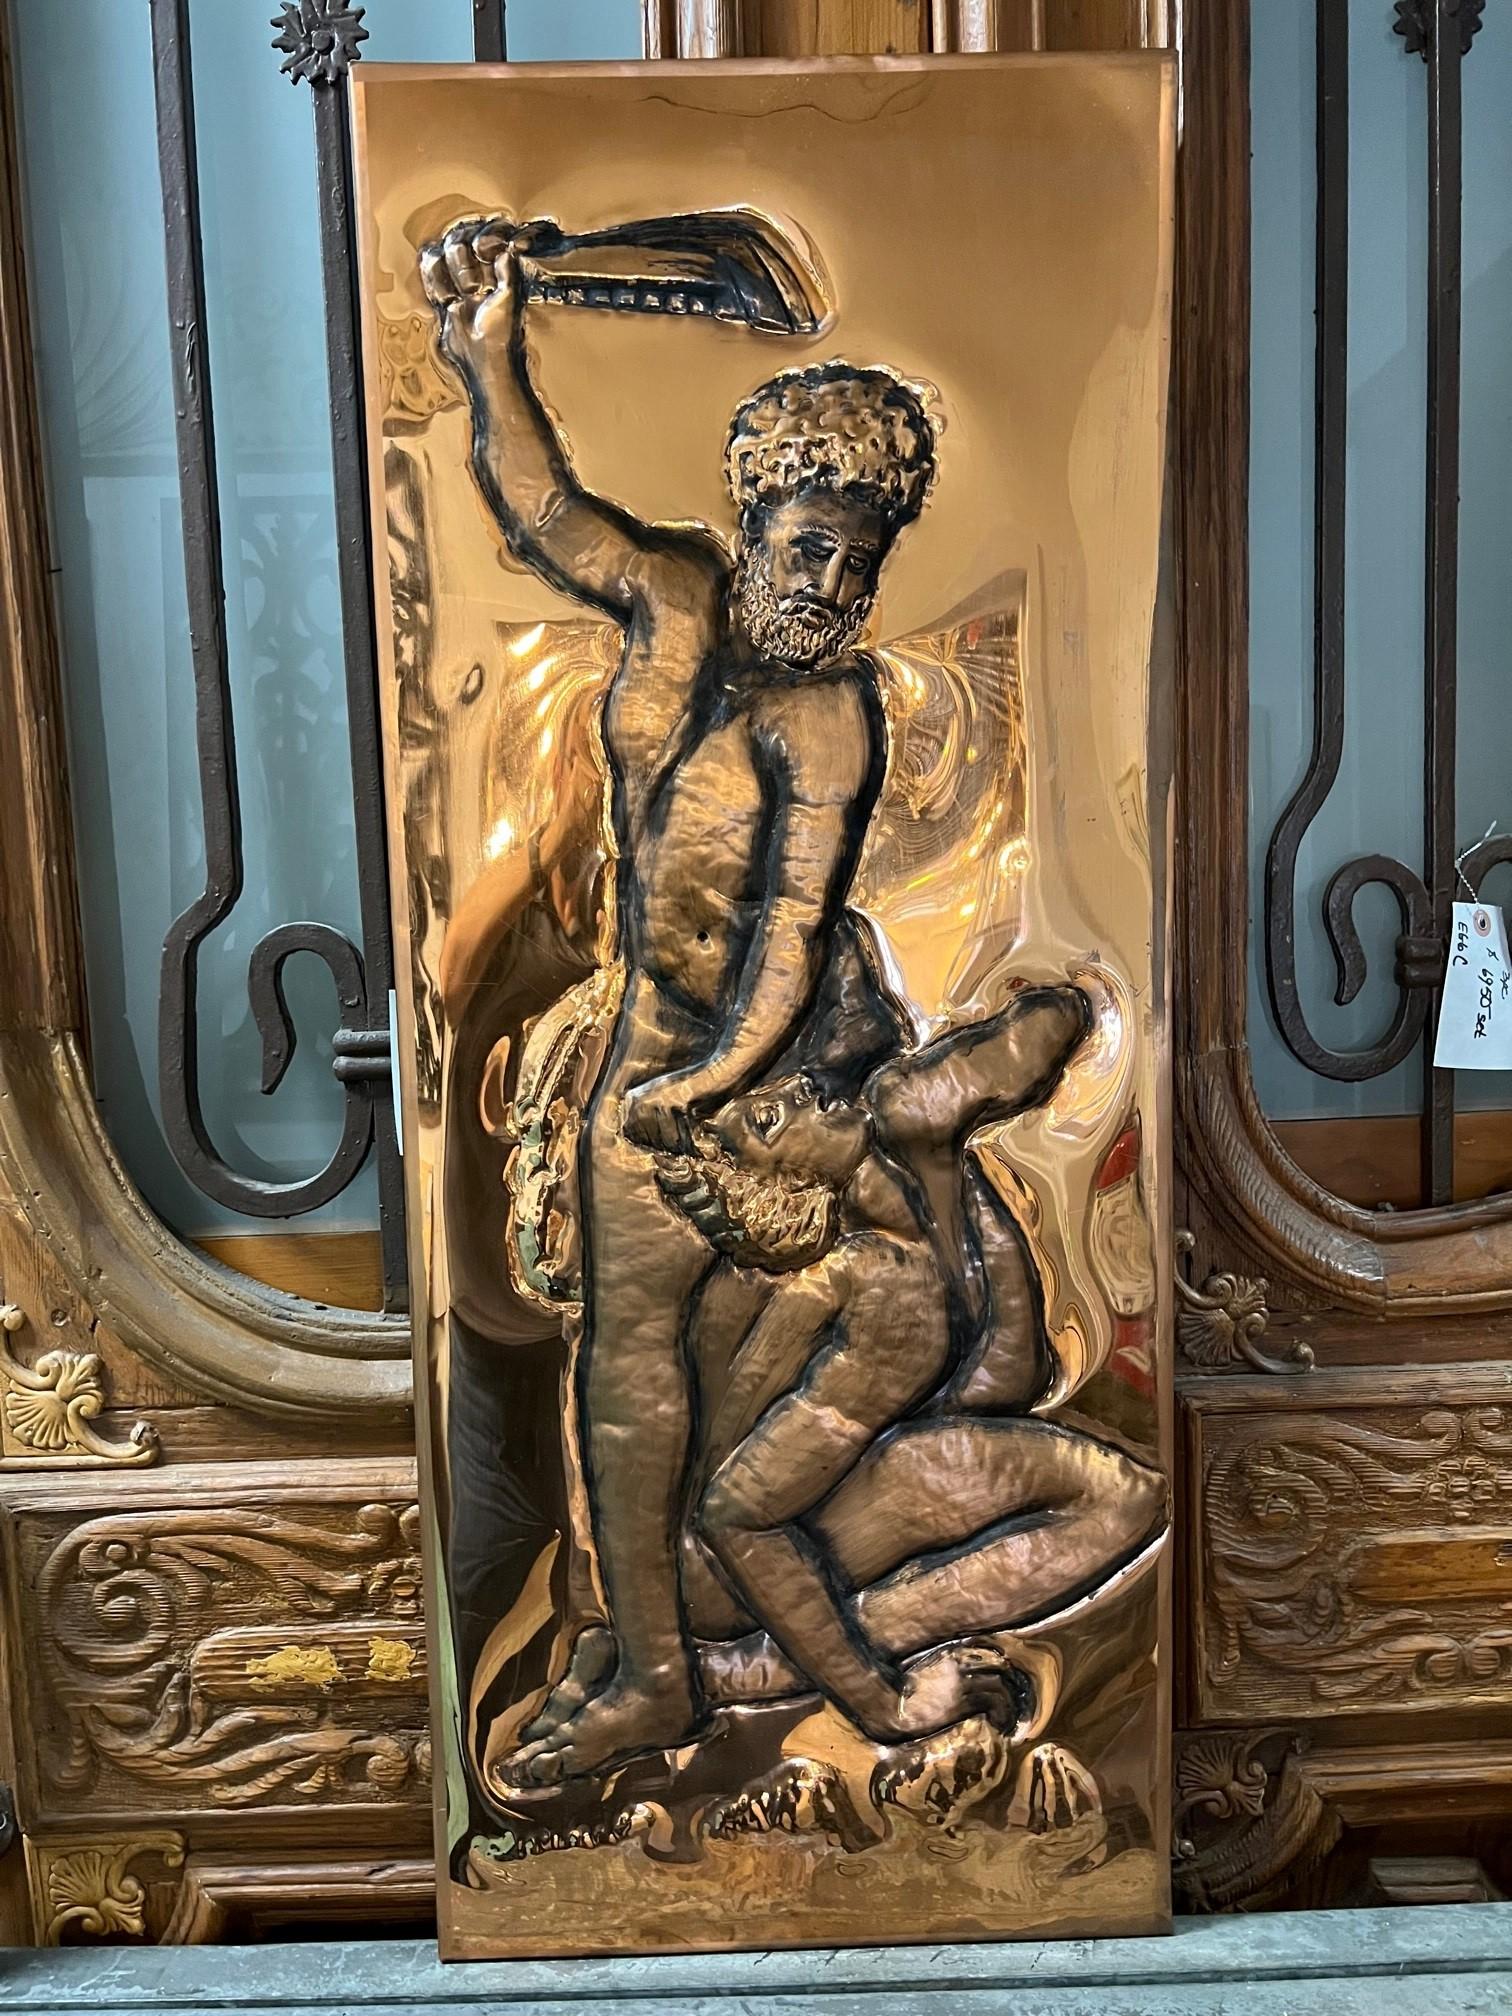 Late 20th century hand hammered copper panel of Samson slaying a Philistine signed and dated. Inspired by the famous marble sculpture by Giambologna of Samson who used a jawbone of an ass to slay one of the Philistines who have taunted him. It is in